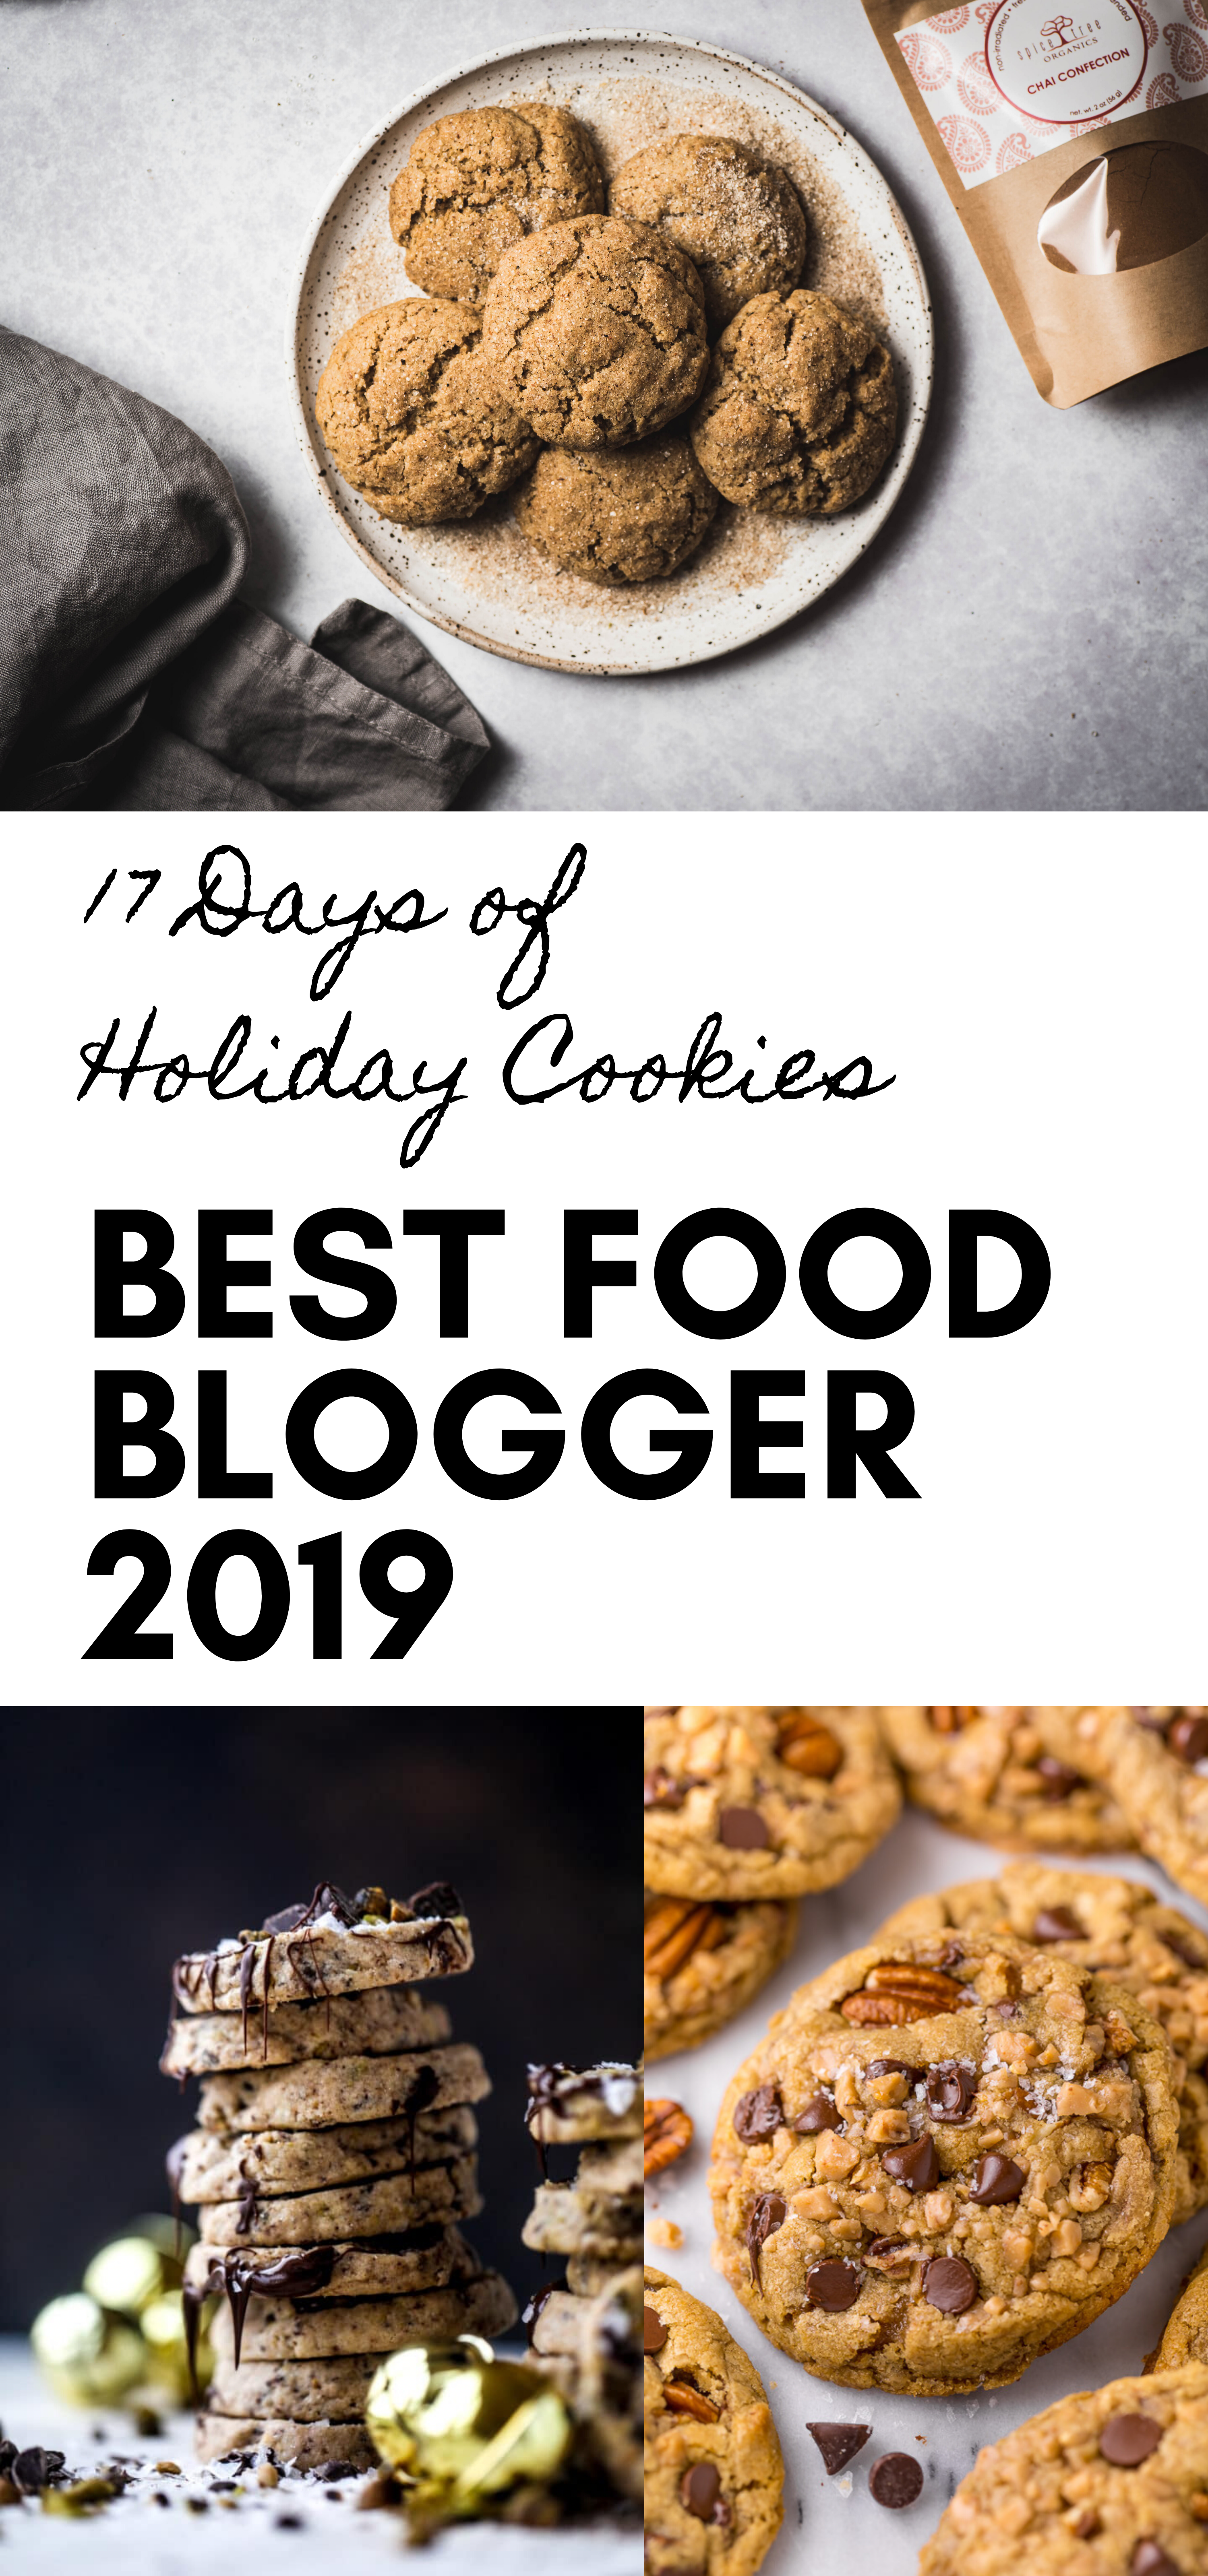 17 days of holiday cookies